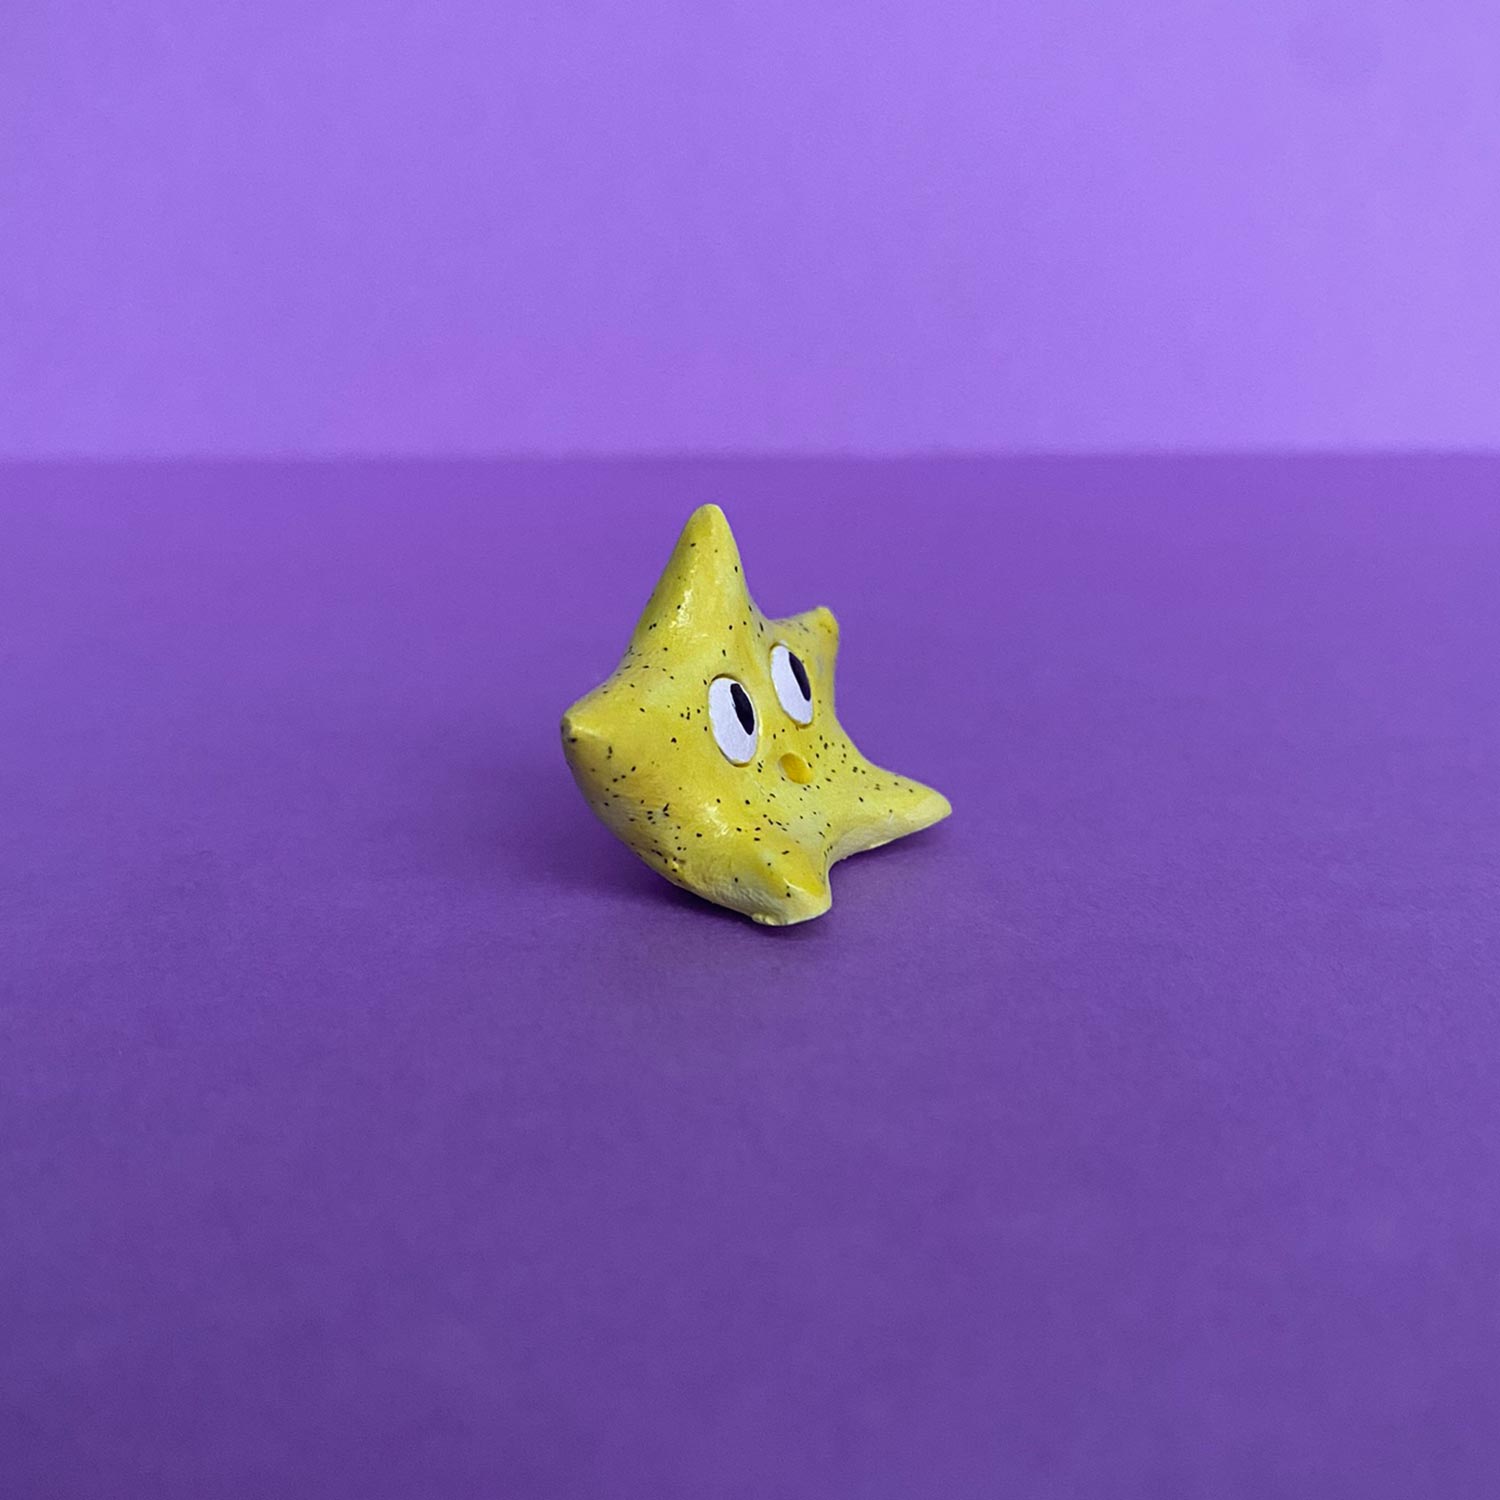 Lumina the lucky star figurine from the mystery bag